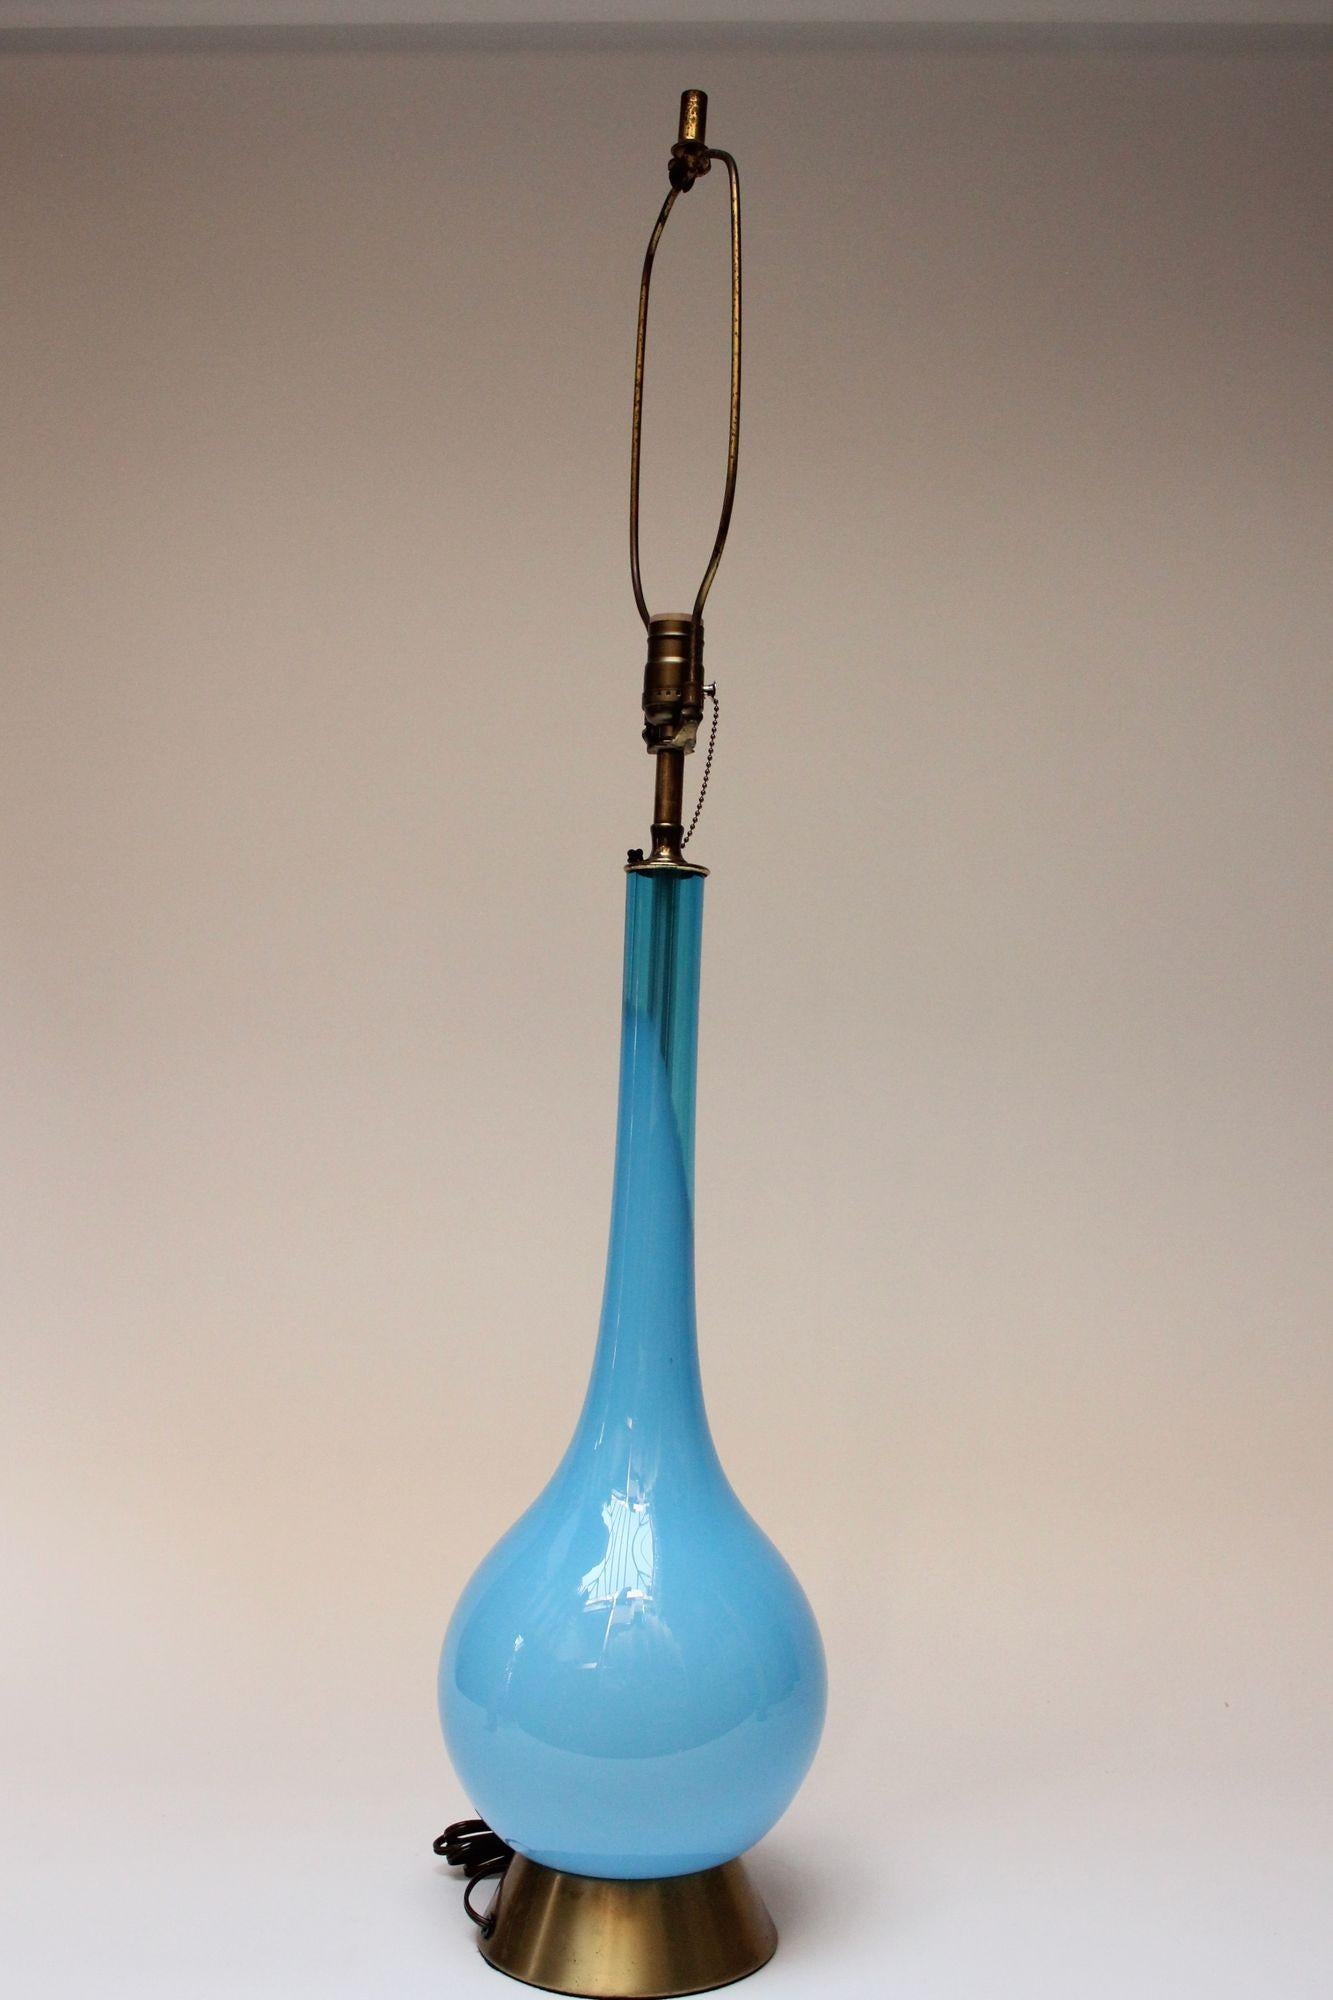 Vintage blown glass lamp in turquoise supported by a brushed brass base (circa 1960s, Italy).
Interesting composition with most of the lamp appearing to be opaline, but a section of the neck bearing a translucence, which provides a view of the